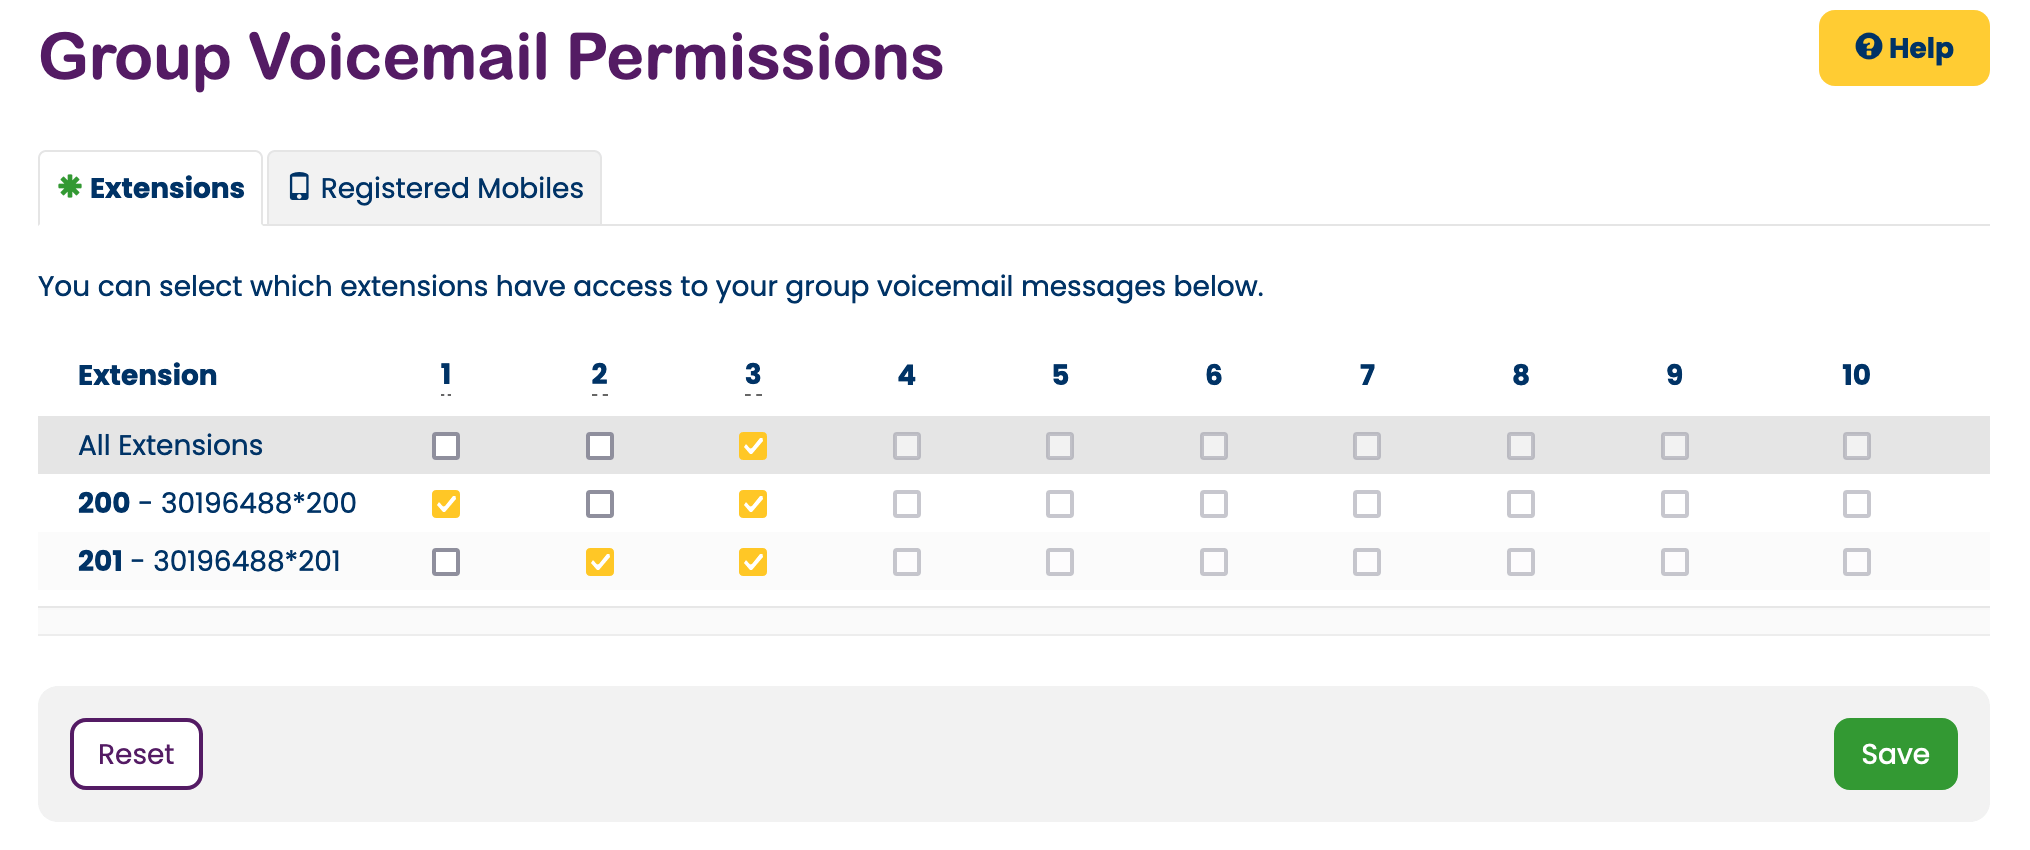 Group Voicemail Permissions